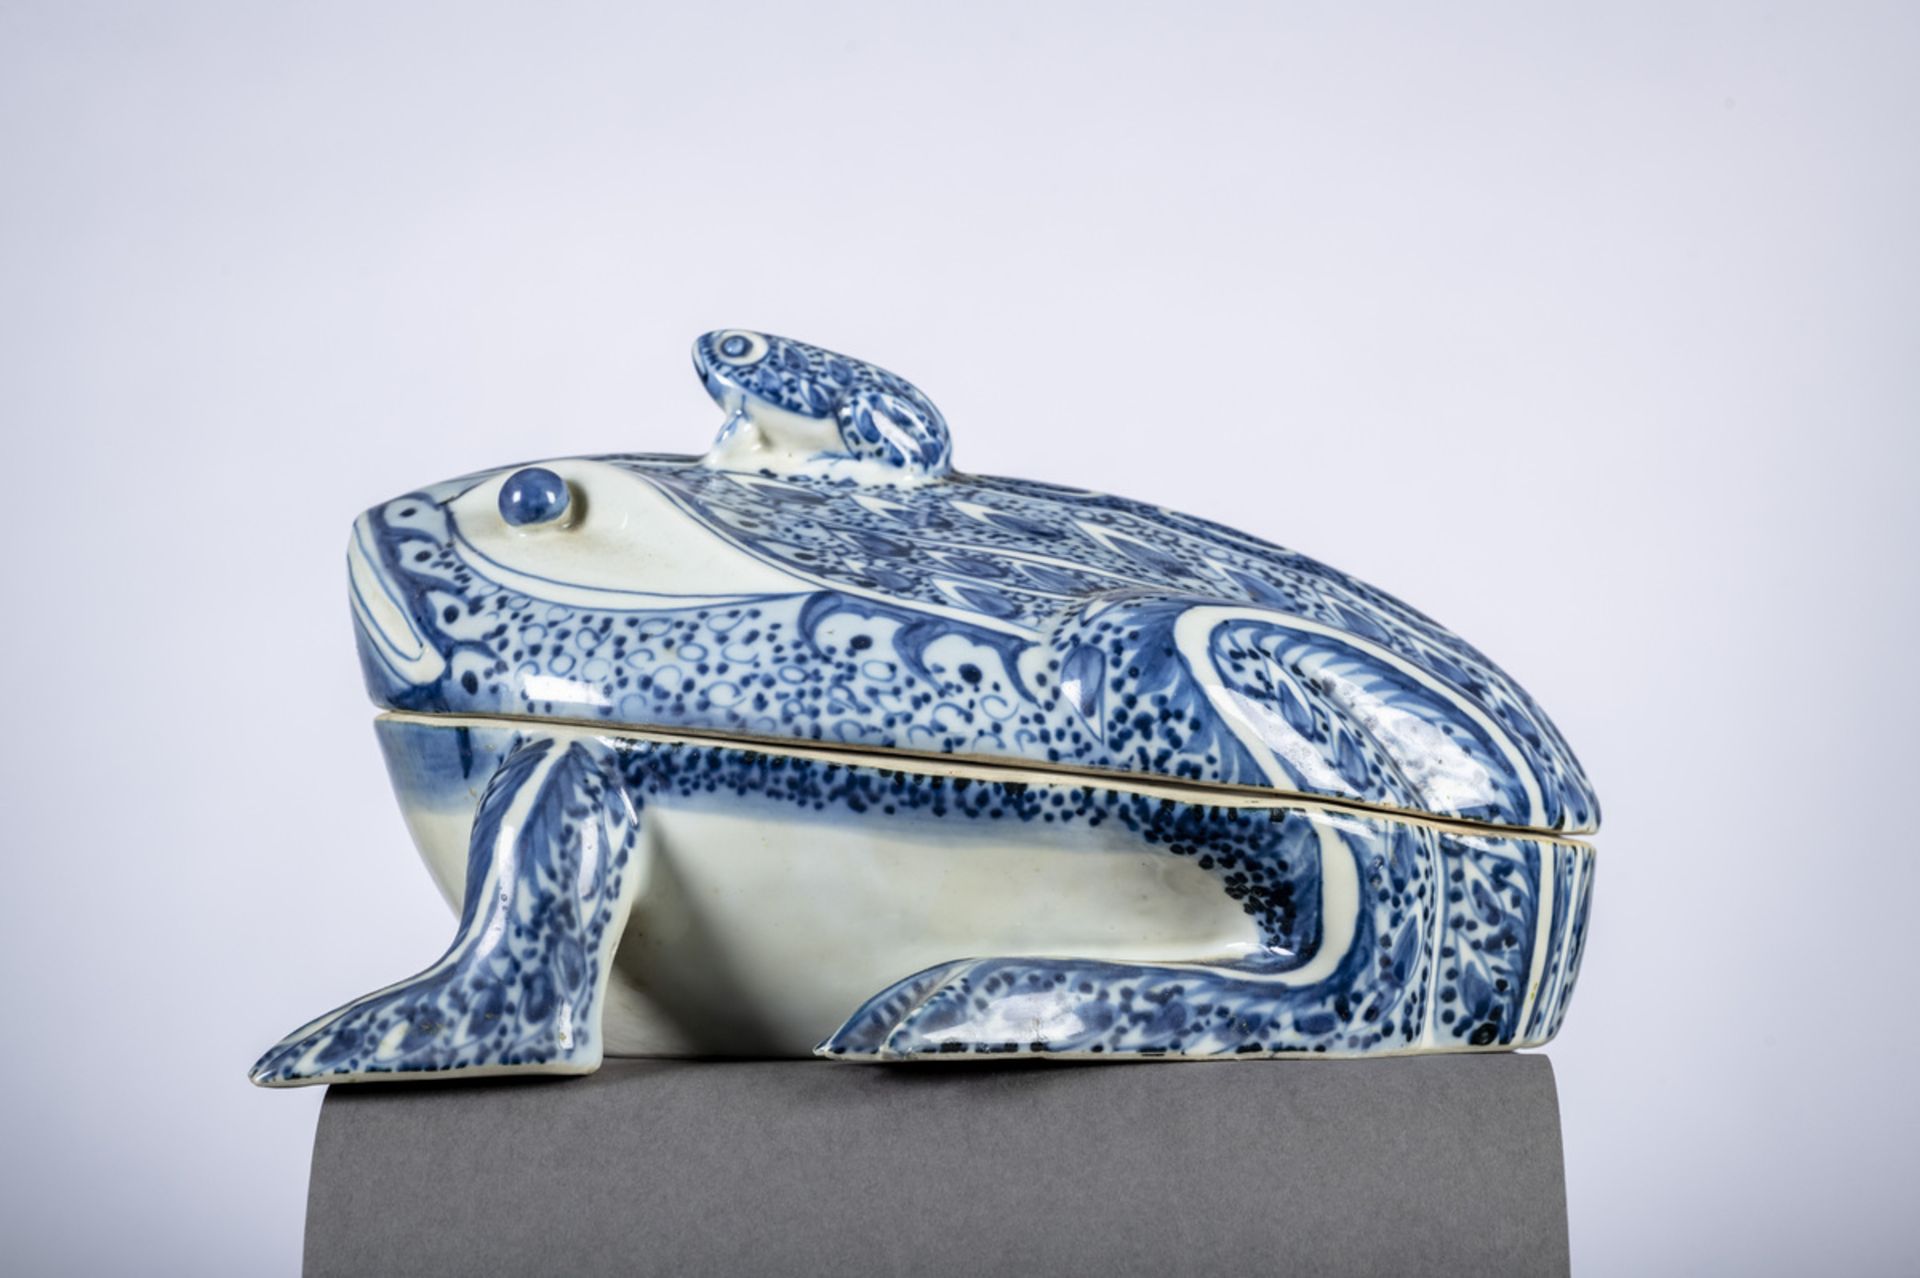 Toad-shaped tureen in Chinese blue and white porcelain (13x26cm)